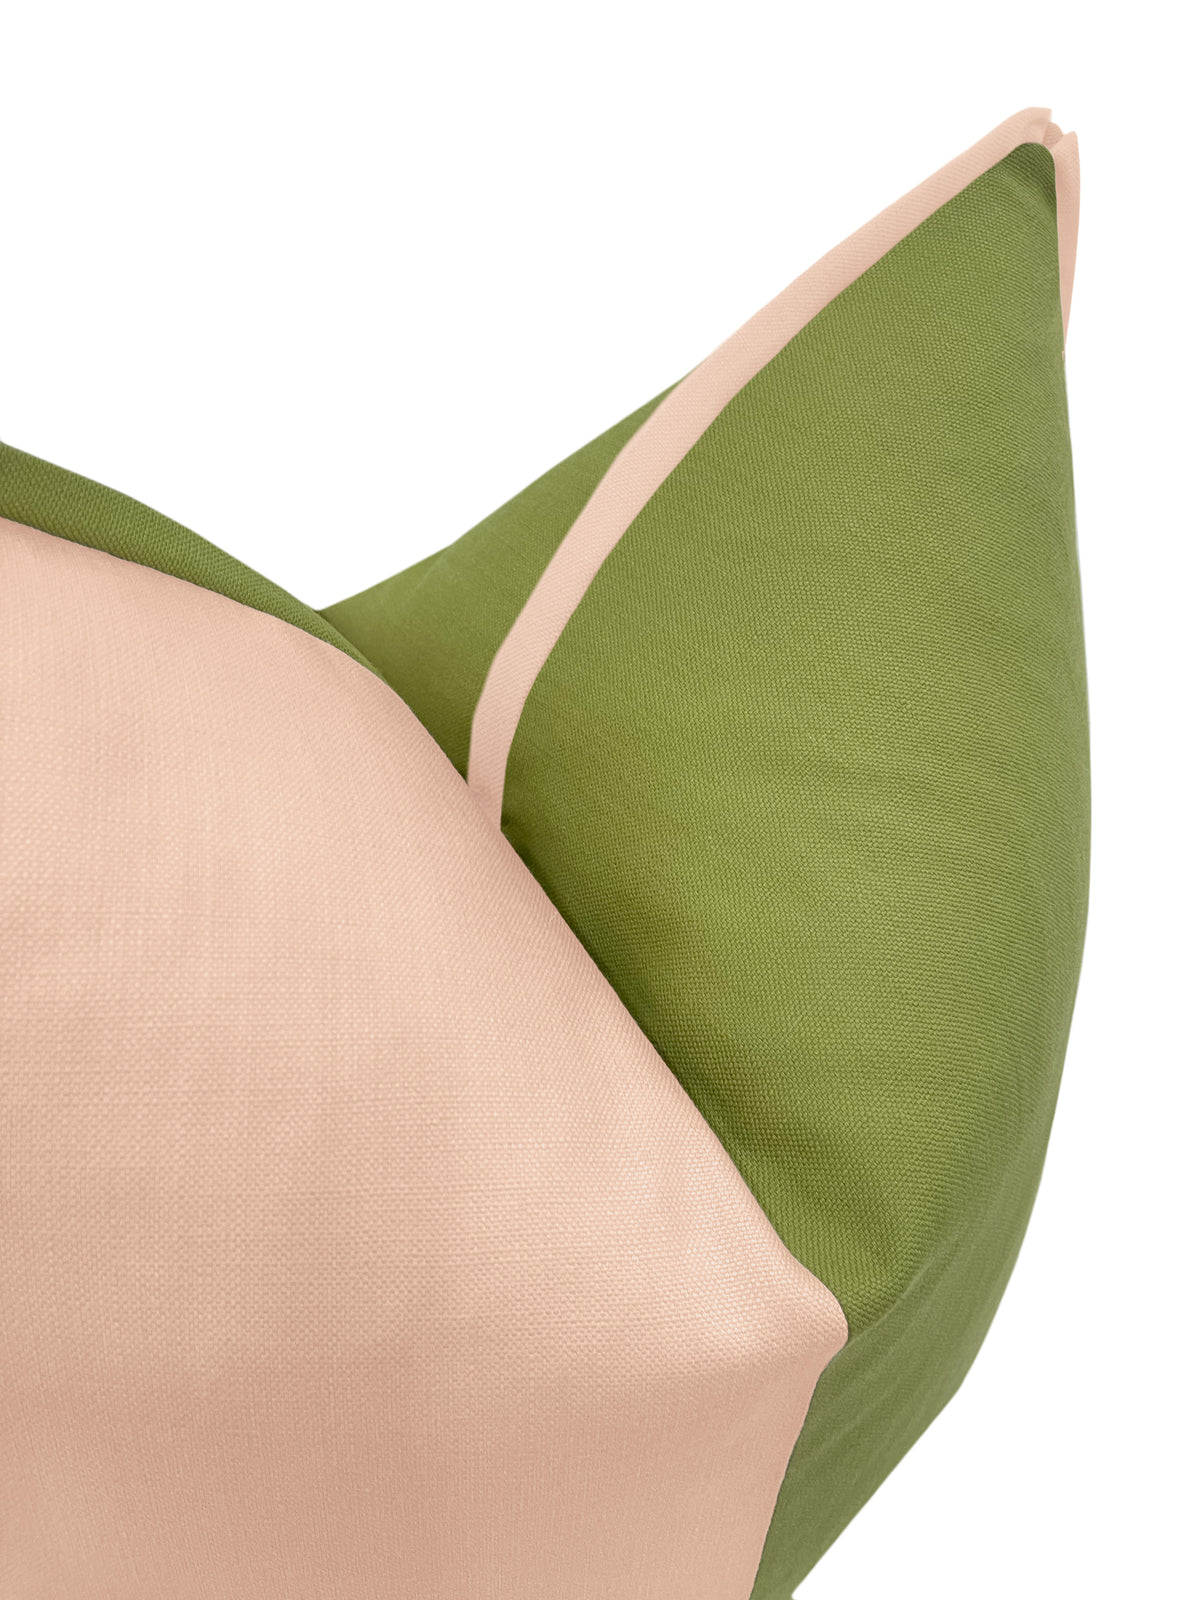 THE DUET | CLASSIC LINEN // CAMEO + OLIVE